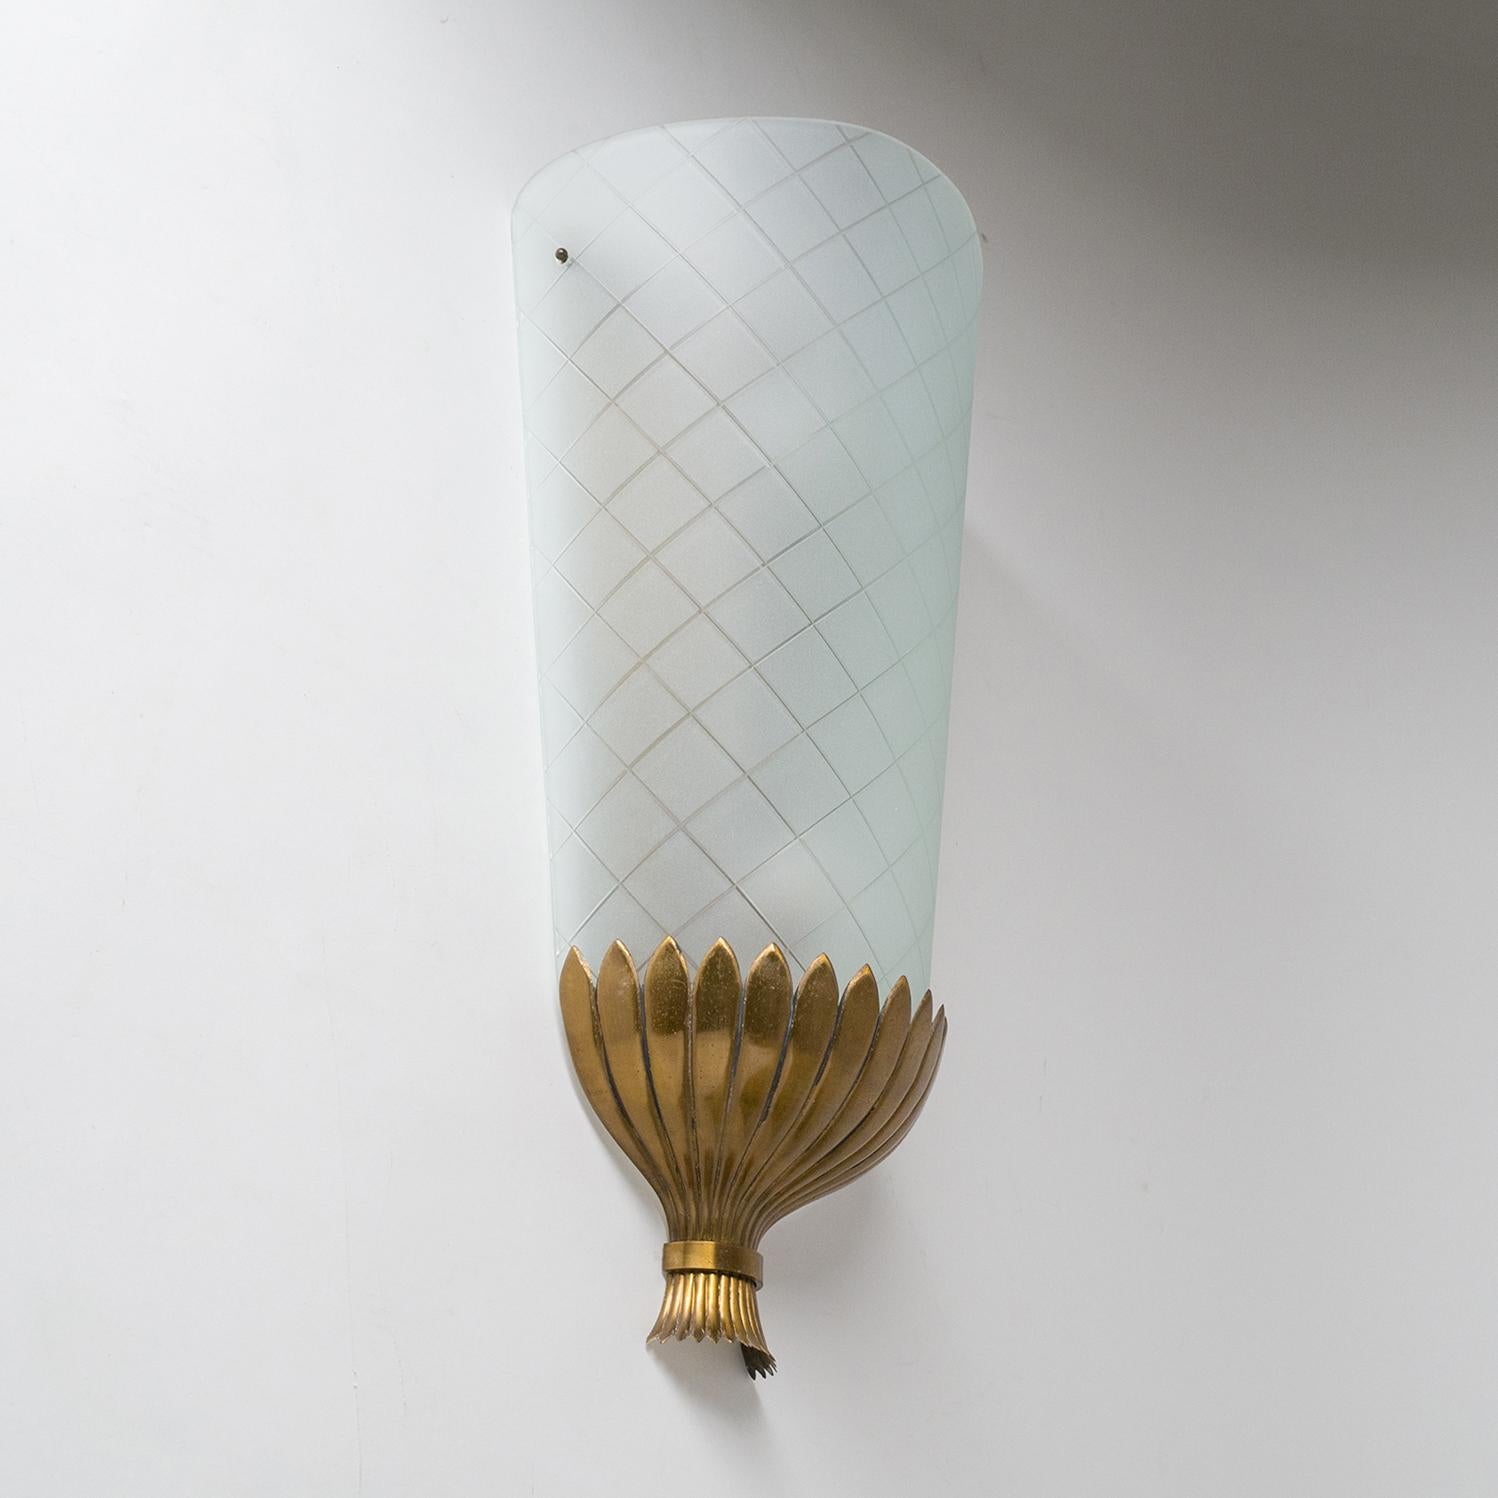 Rare oversized Art Deco wall light, from the 1930s. A large curved and satinated glass diffuser with geometric incisions sits on top of a lovely stylized brass bouquet. Very nice original condition with some patina on the brass. Two original brass